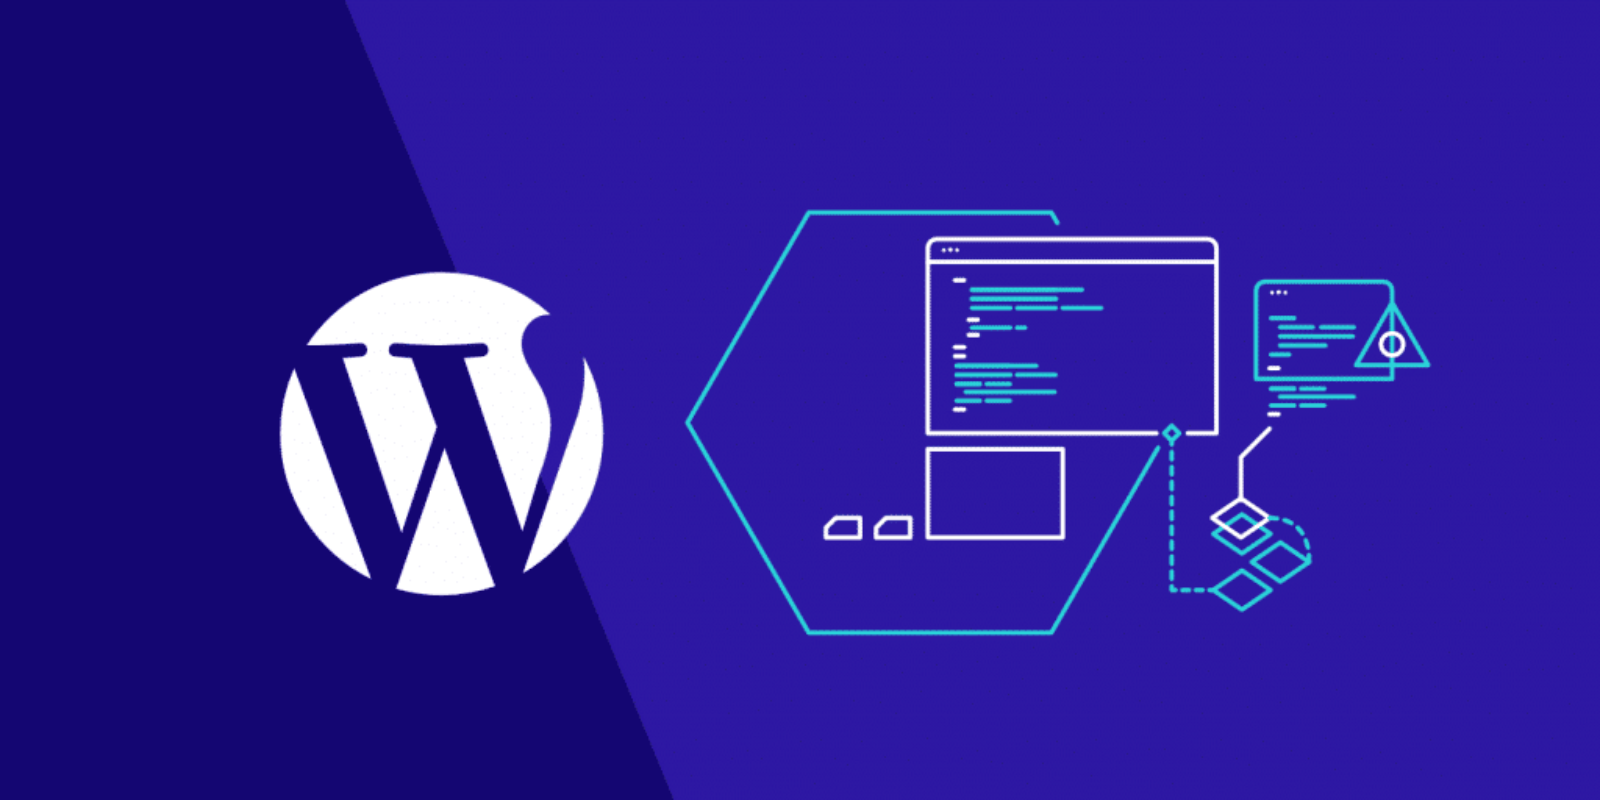 Here are some reasons why you should hire a reliable WordPress developer